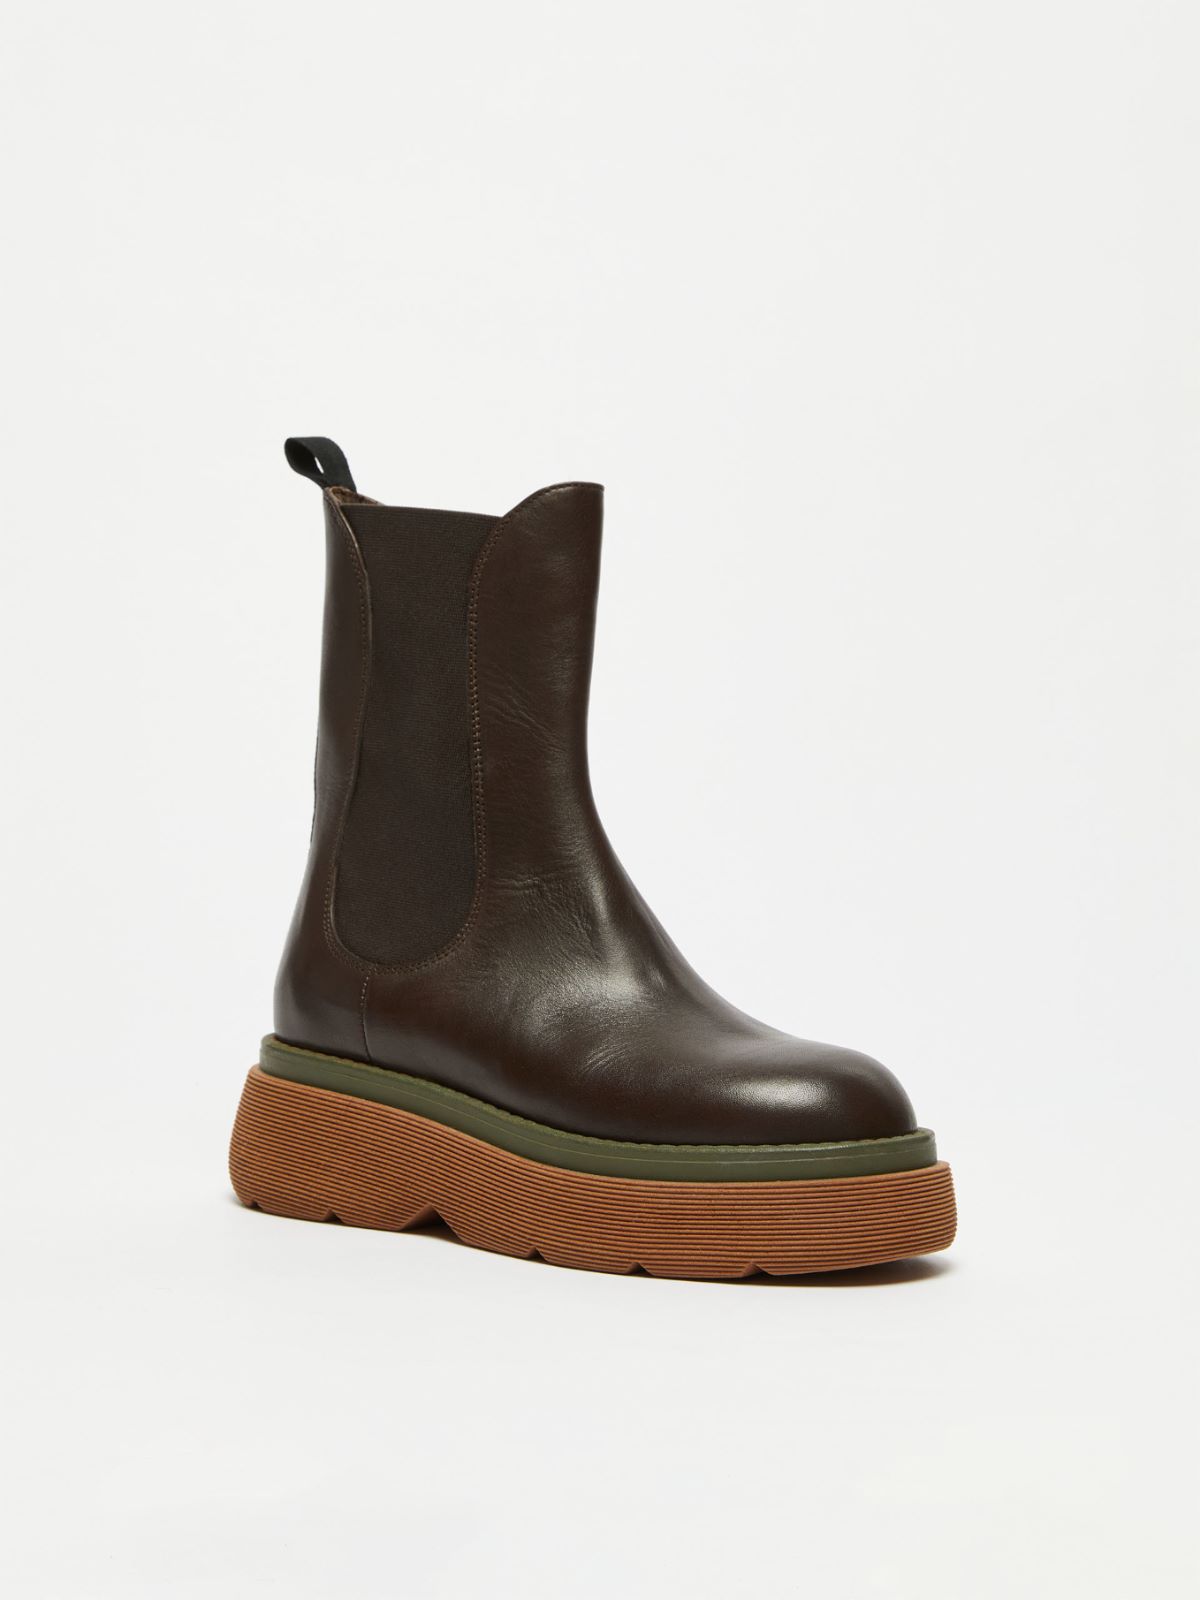 Leather ankle boots - DARK BOWN - Weekend Max Mara - 2